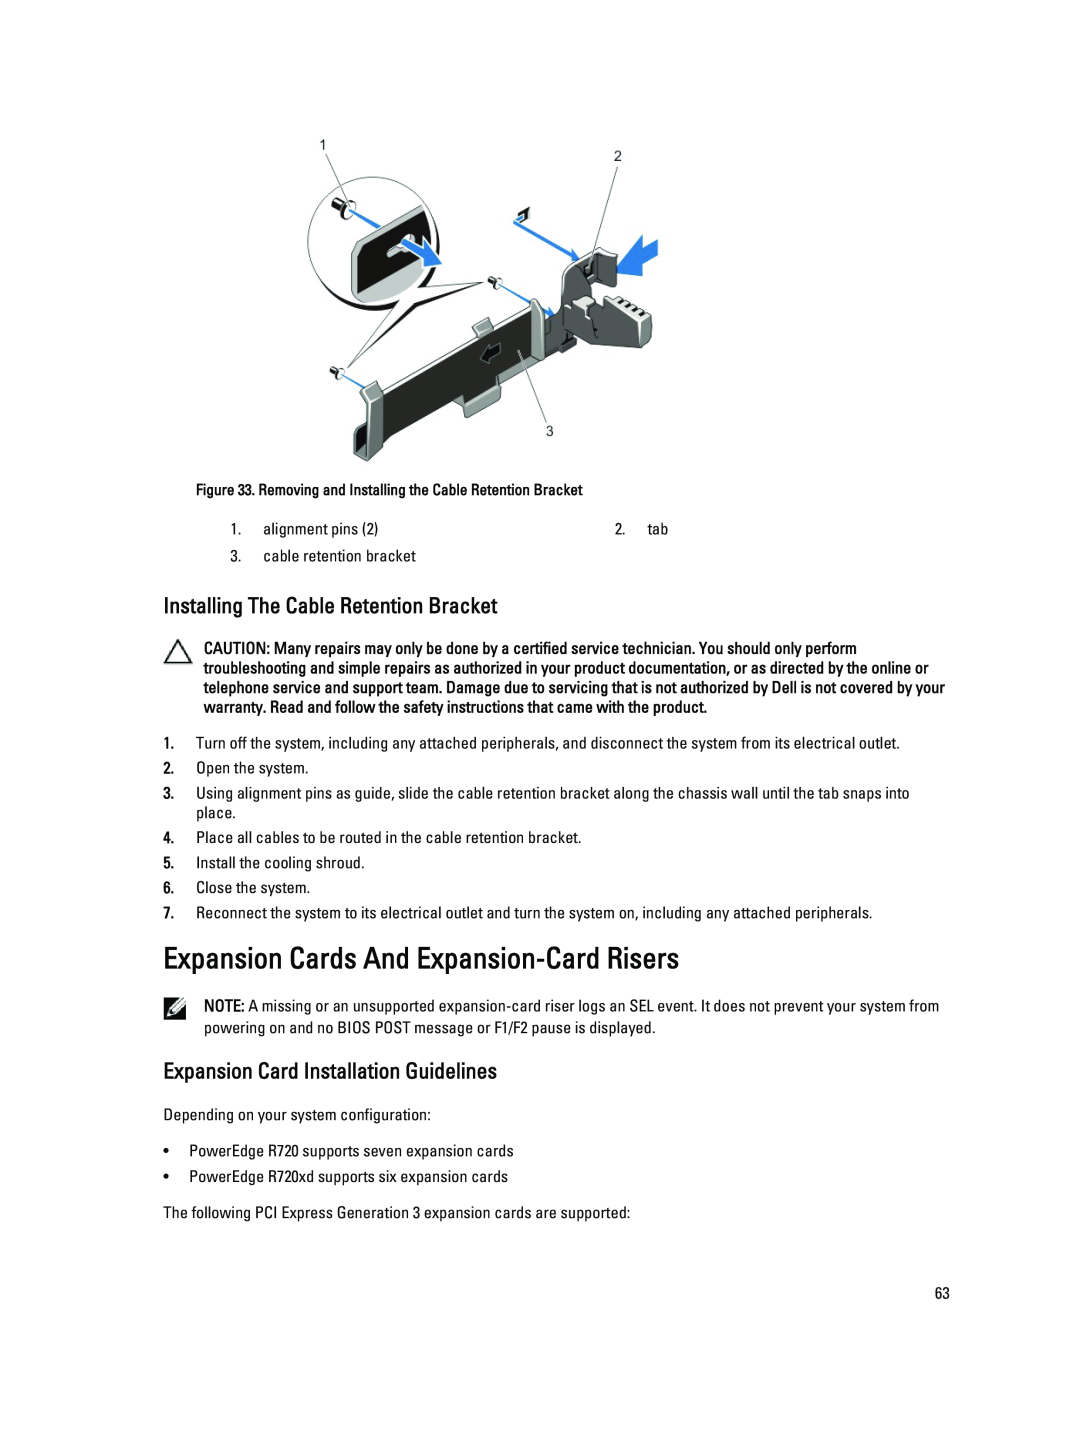 Dell R720XD owner manual Expansion Cards And Expansion-CardRisers, Installing The Cable Retention Bracket 